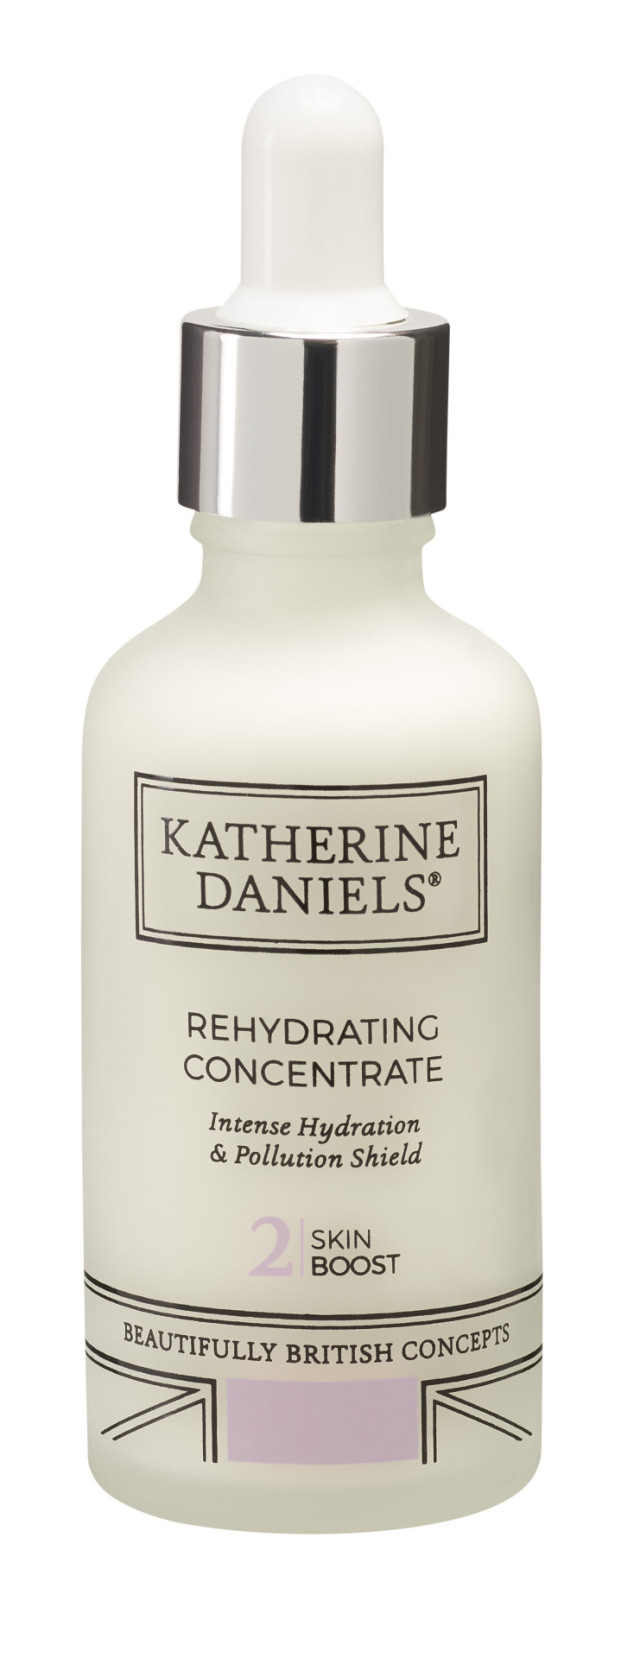 Katherine Daniels Rehydrating Concentrate